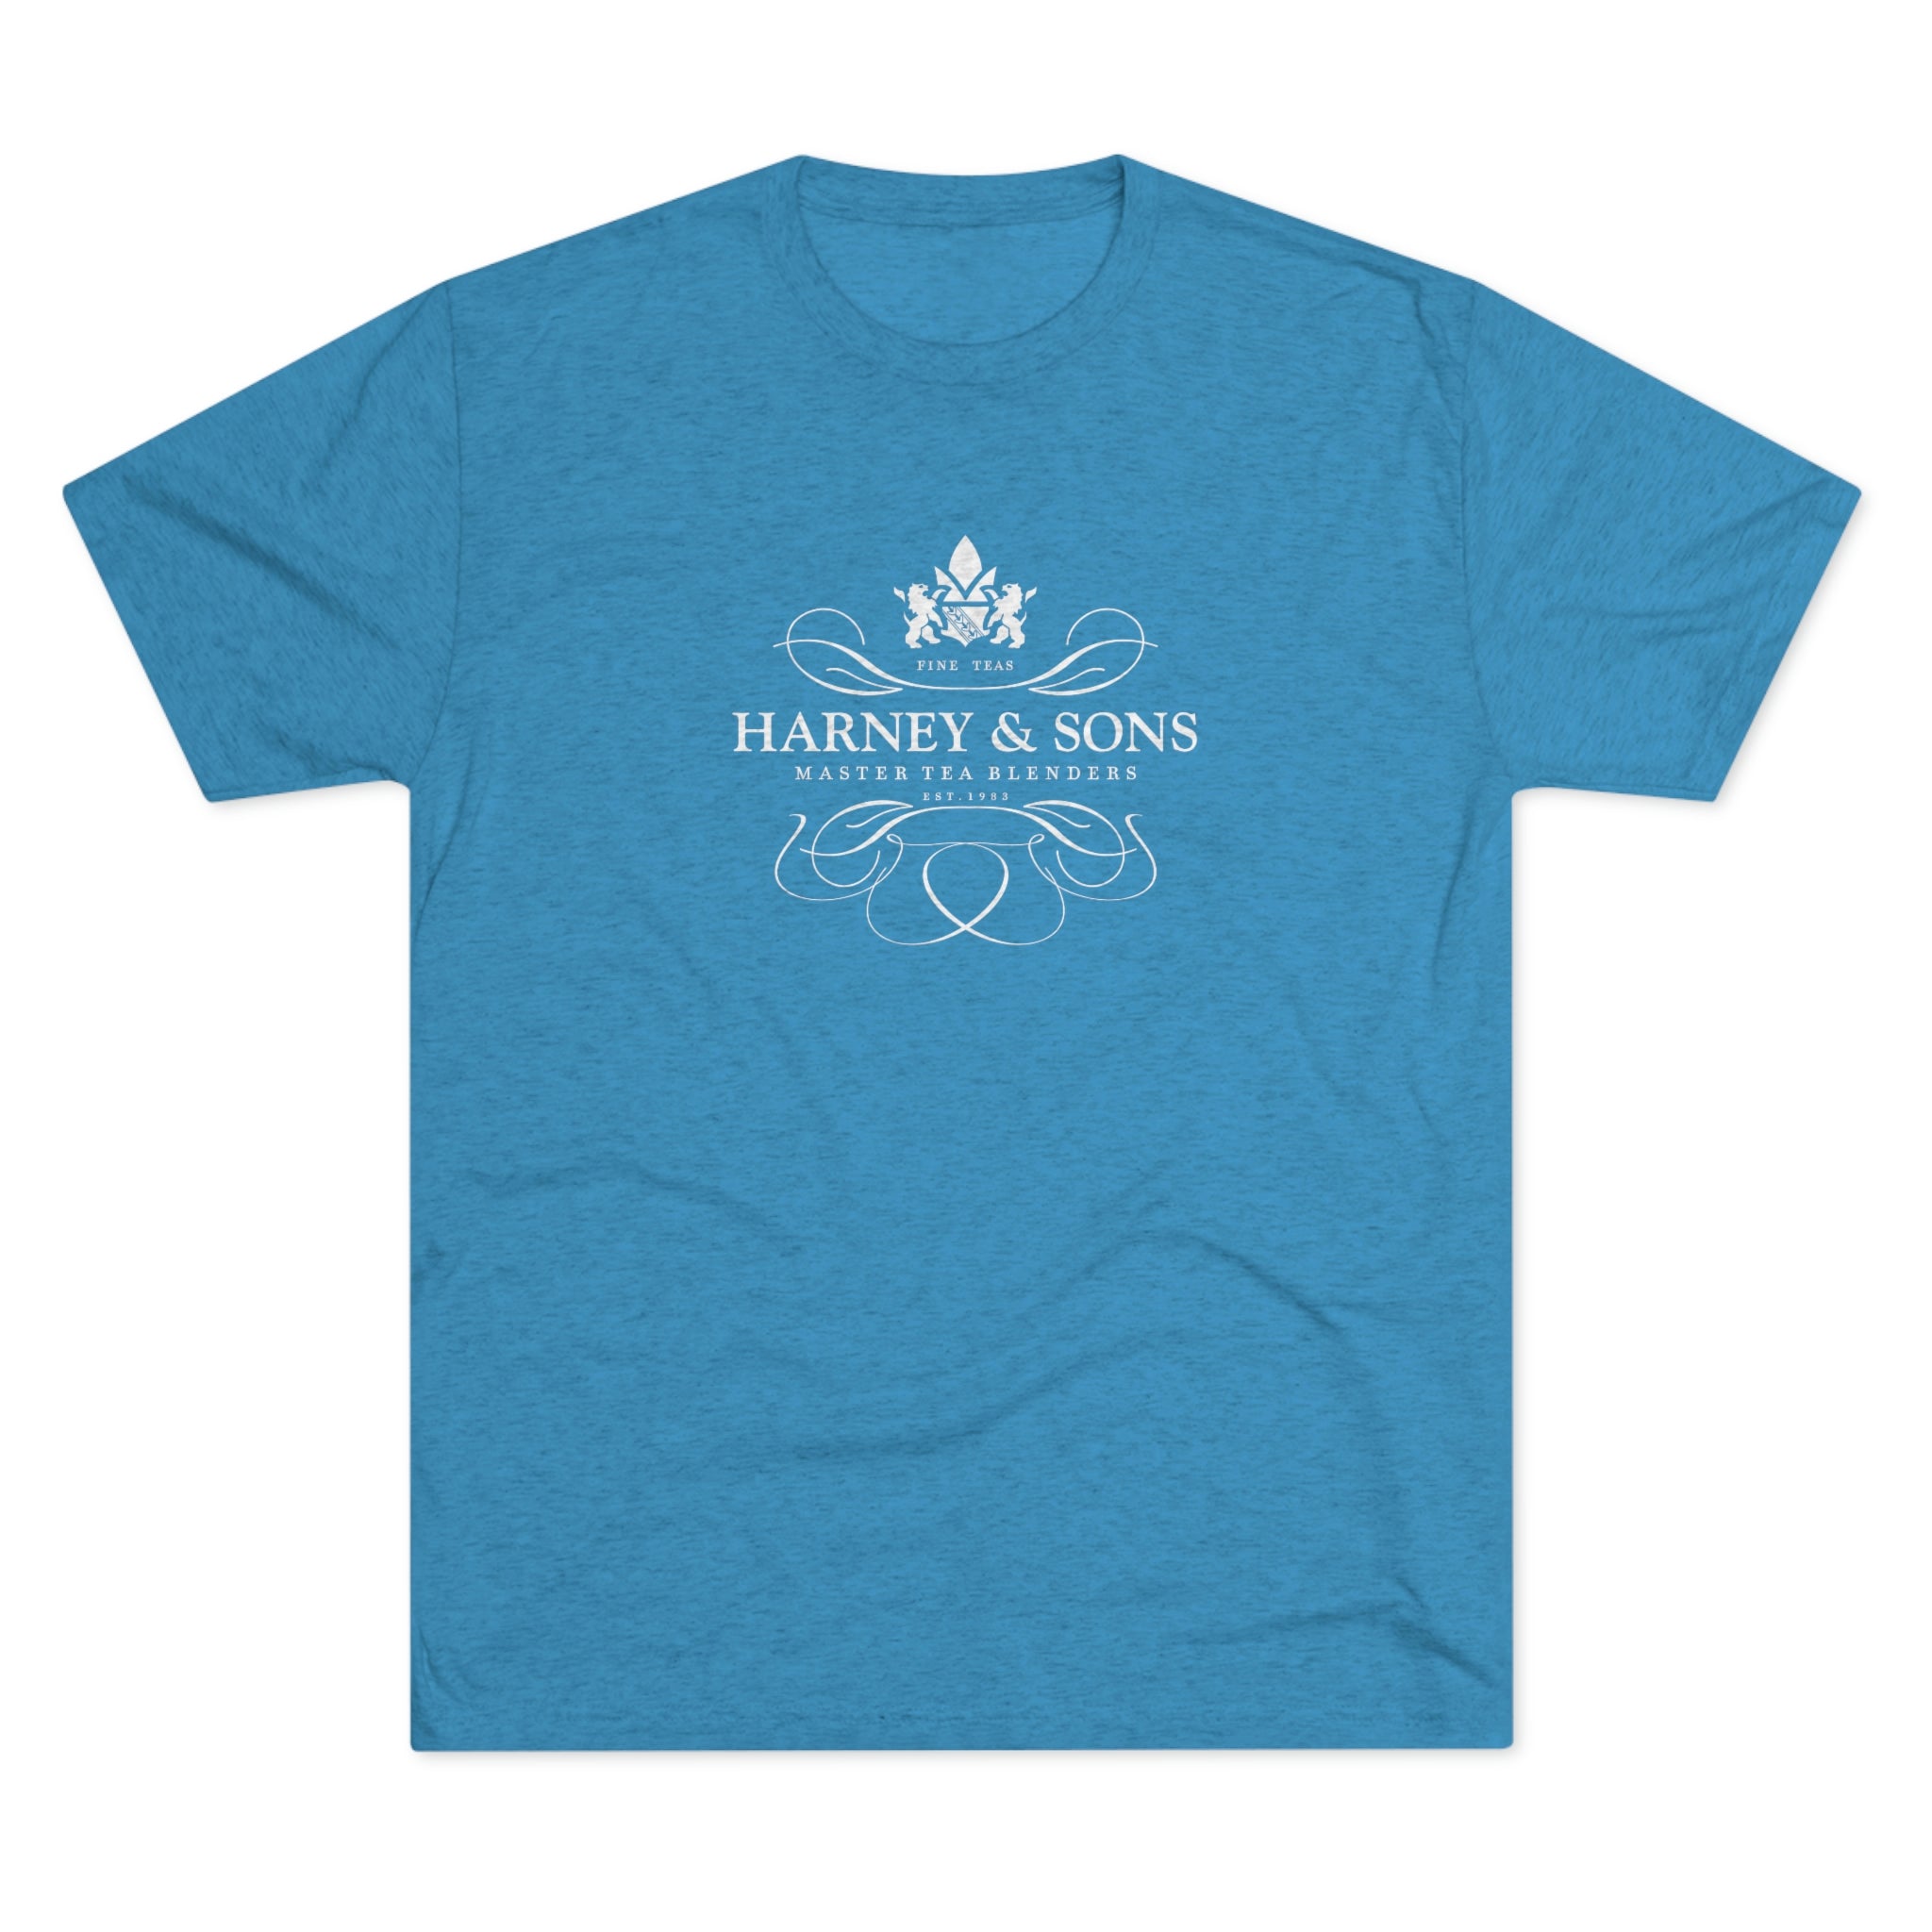 Harney & Sons Logo Graphic Tee - Tri-Blend Vintage Turquoise S - Harney & Sons Fine Teas